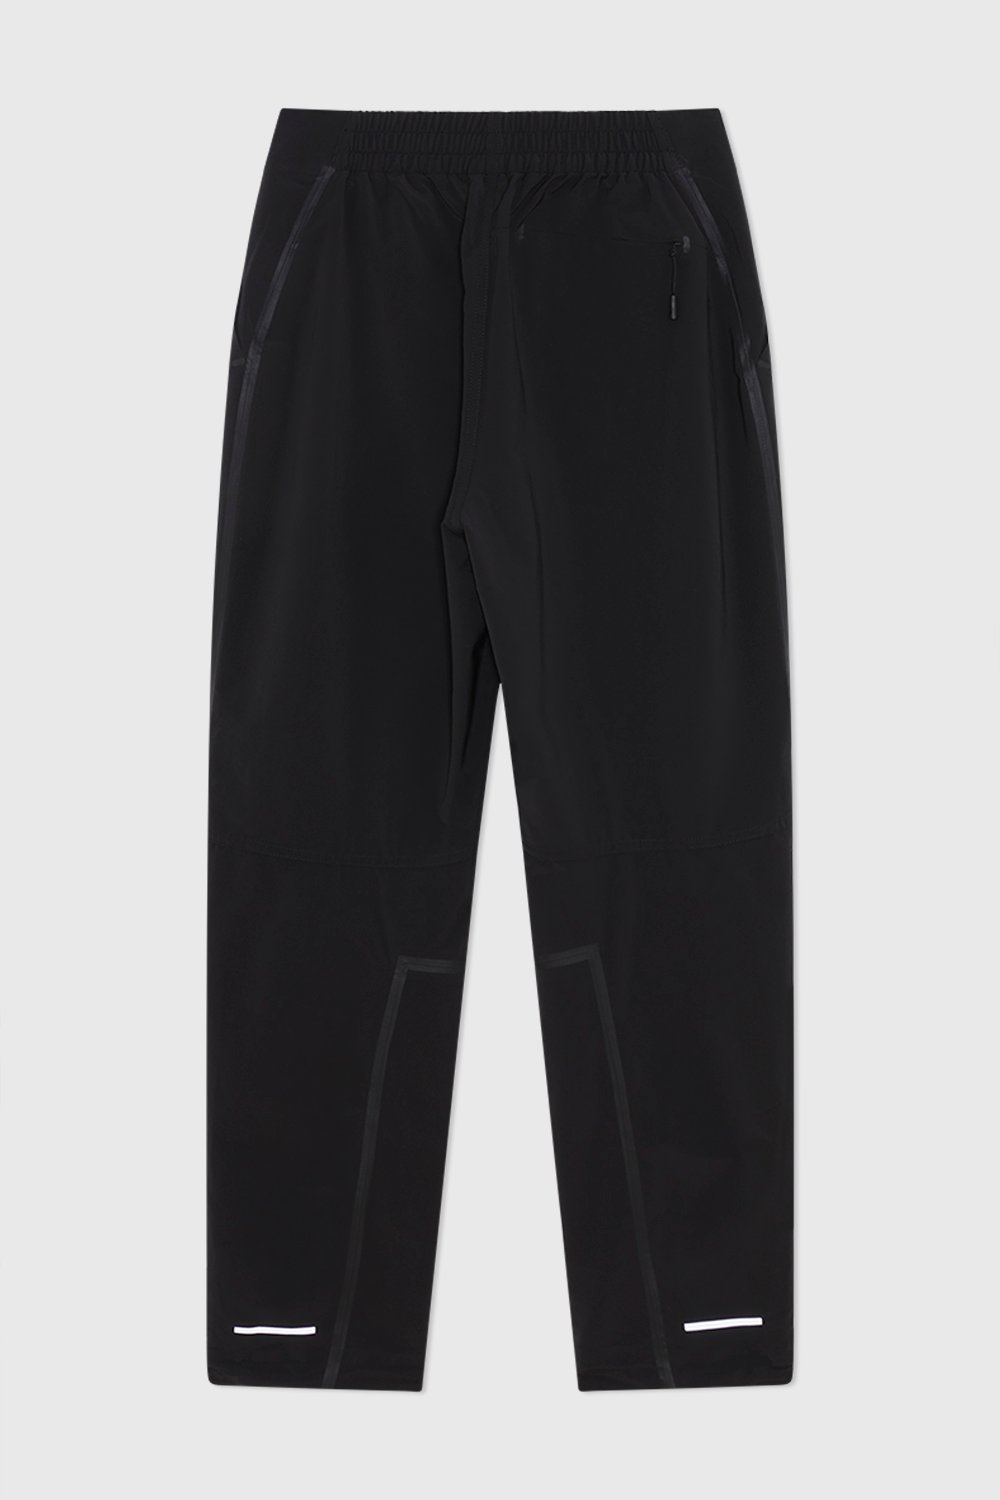 The North Face W RMST Mountain Pant Tnf black (jk3) | WoodWood.com